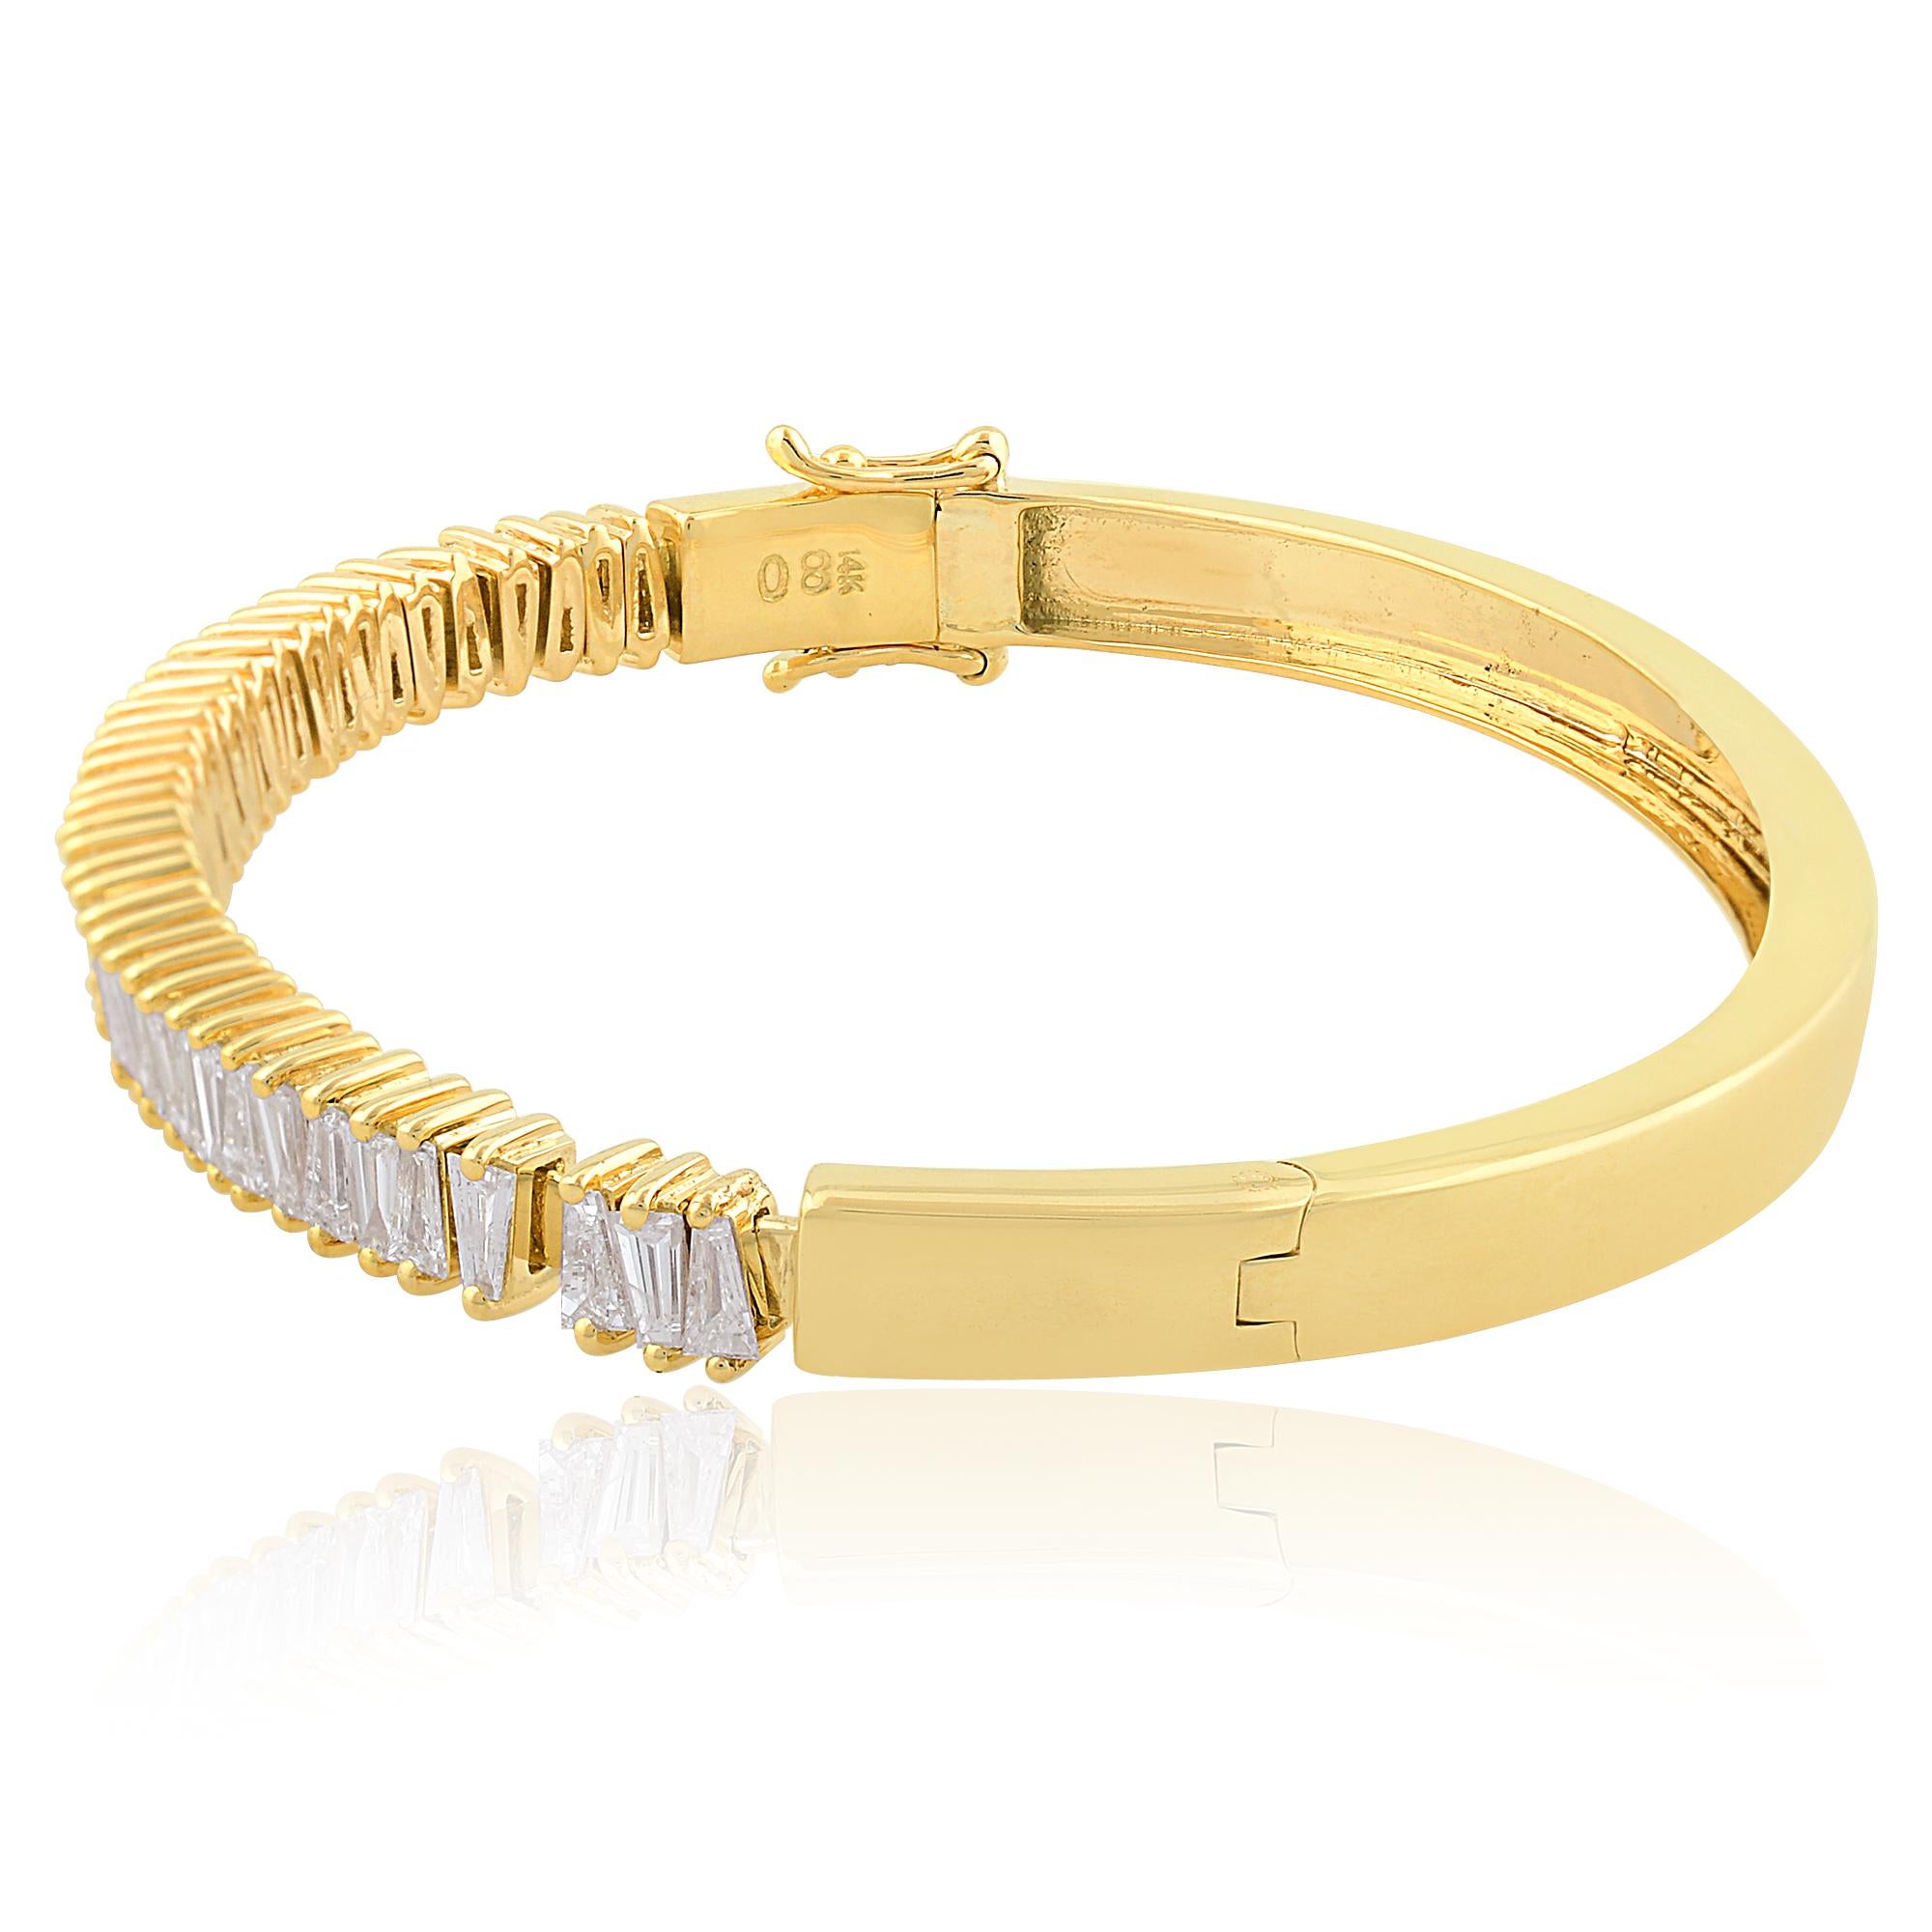 Indulge in the timeless elegance of this Natural Tapered Baguette Diamond Bangle Bracelet, meticulously crafted in 14 Karat Yellow Gold. This exquisite piece of jewelry embodies sophistication and grace, perfect for adding a touch of glamour to any